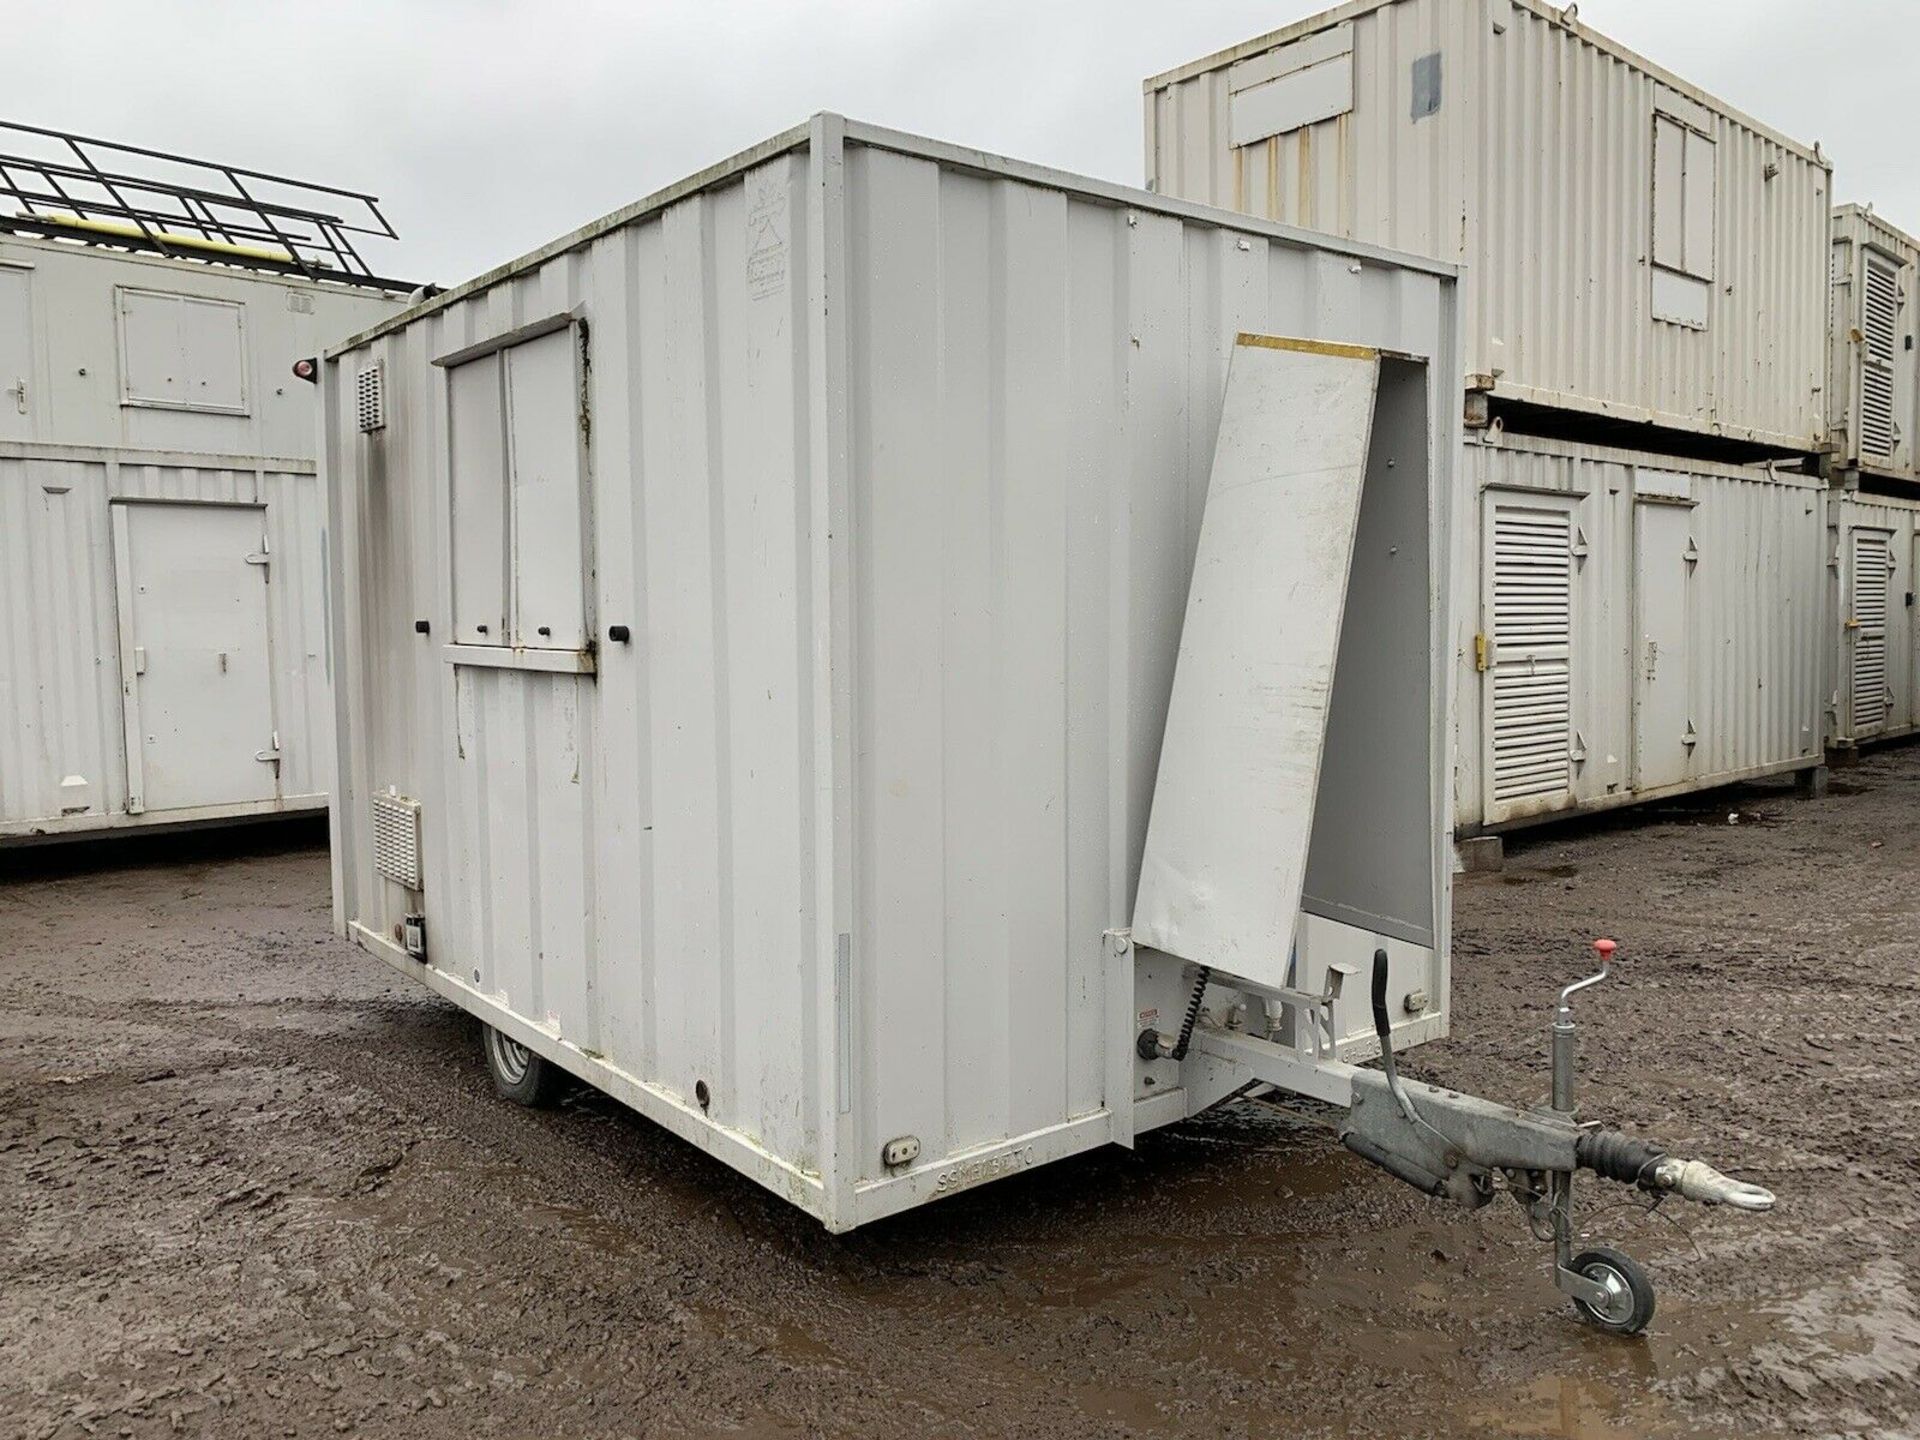 Groundhog GP360 ECO Towable Site Welfare Unit Cant - Image 2 of 11